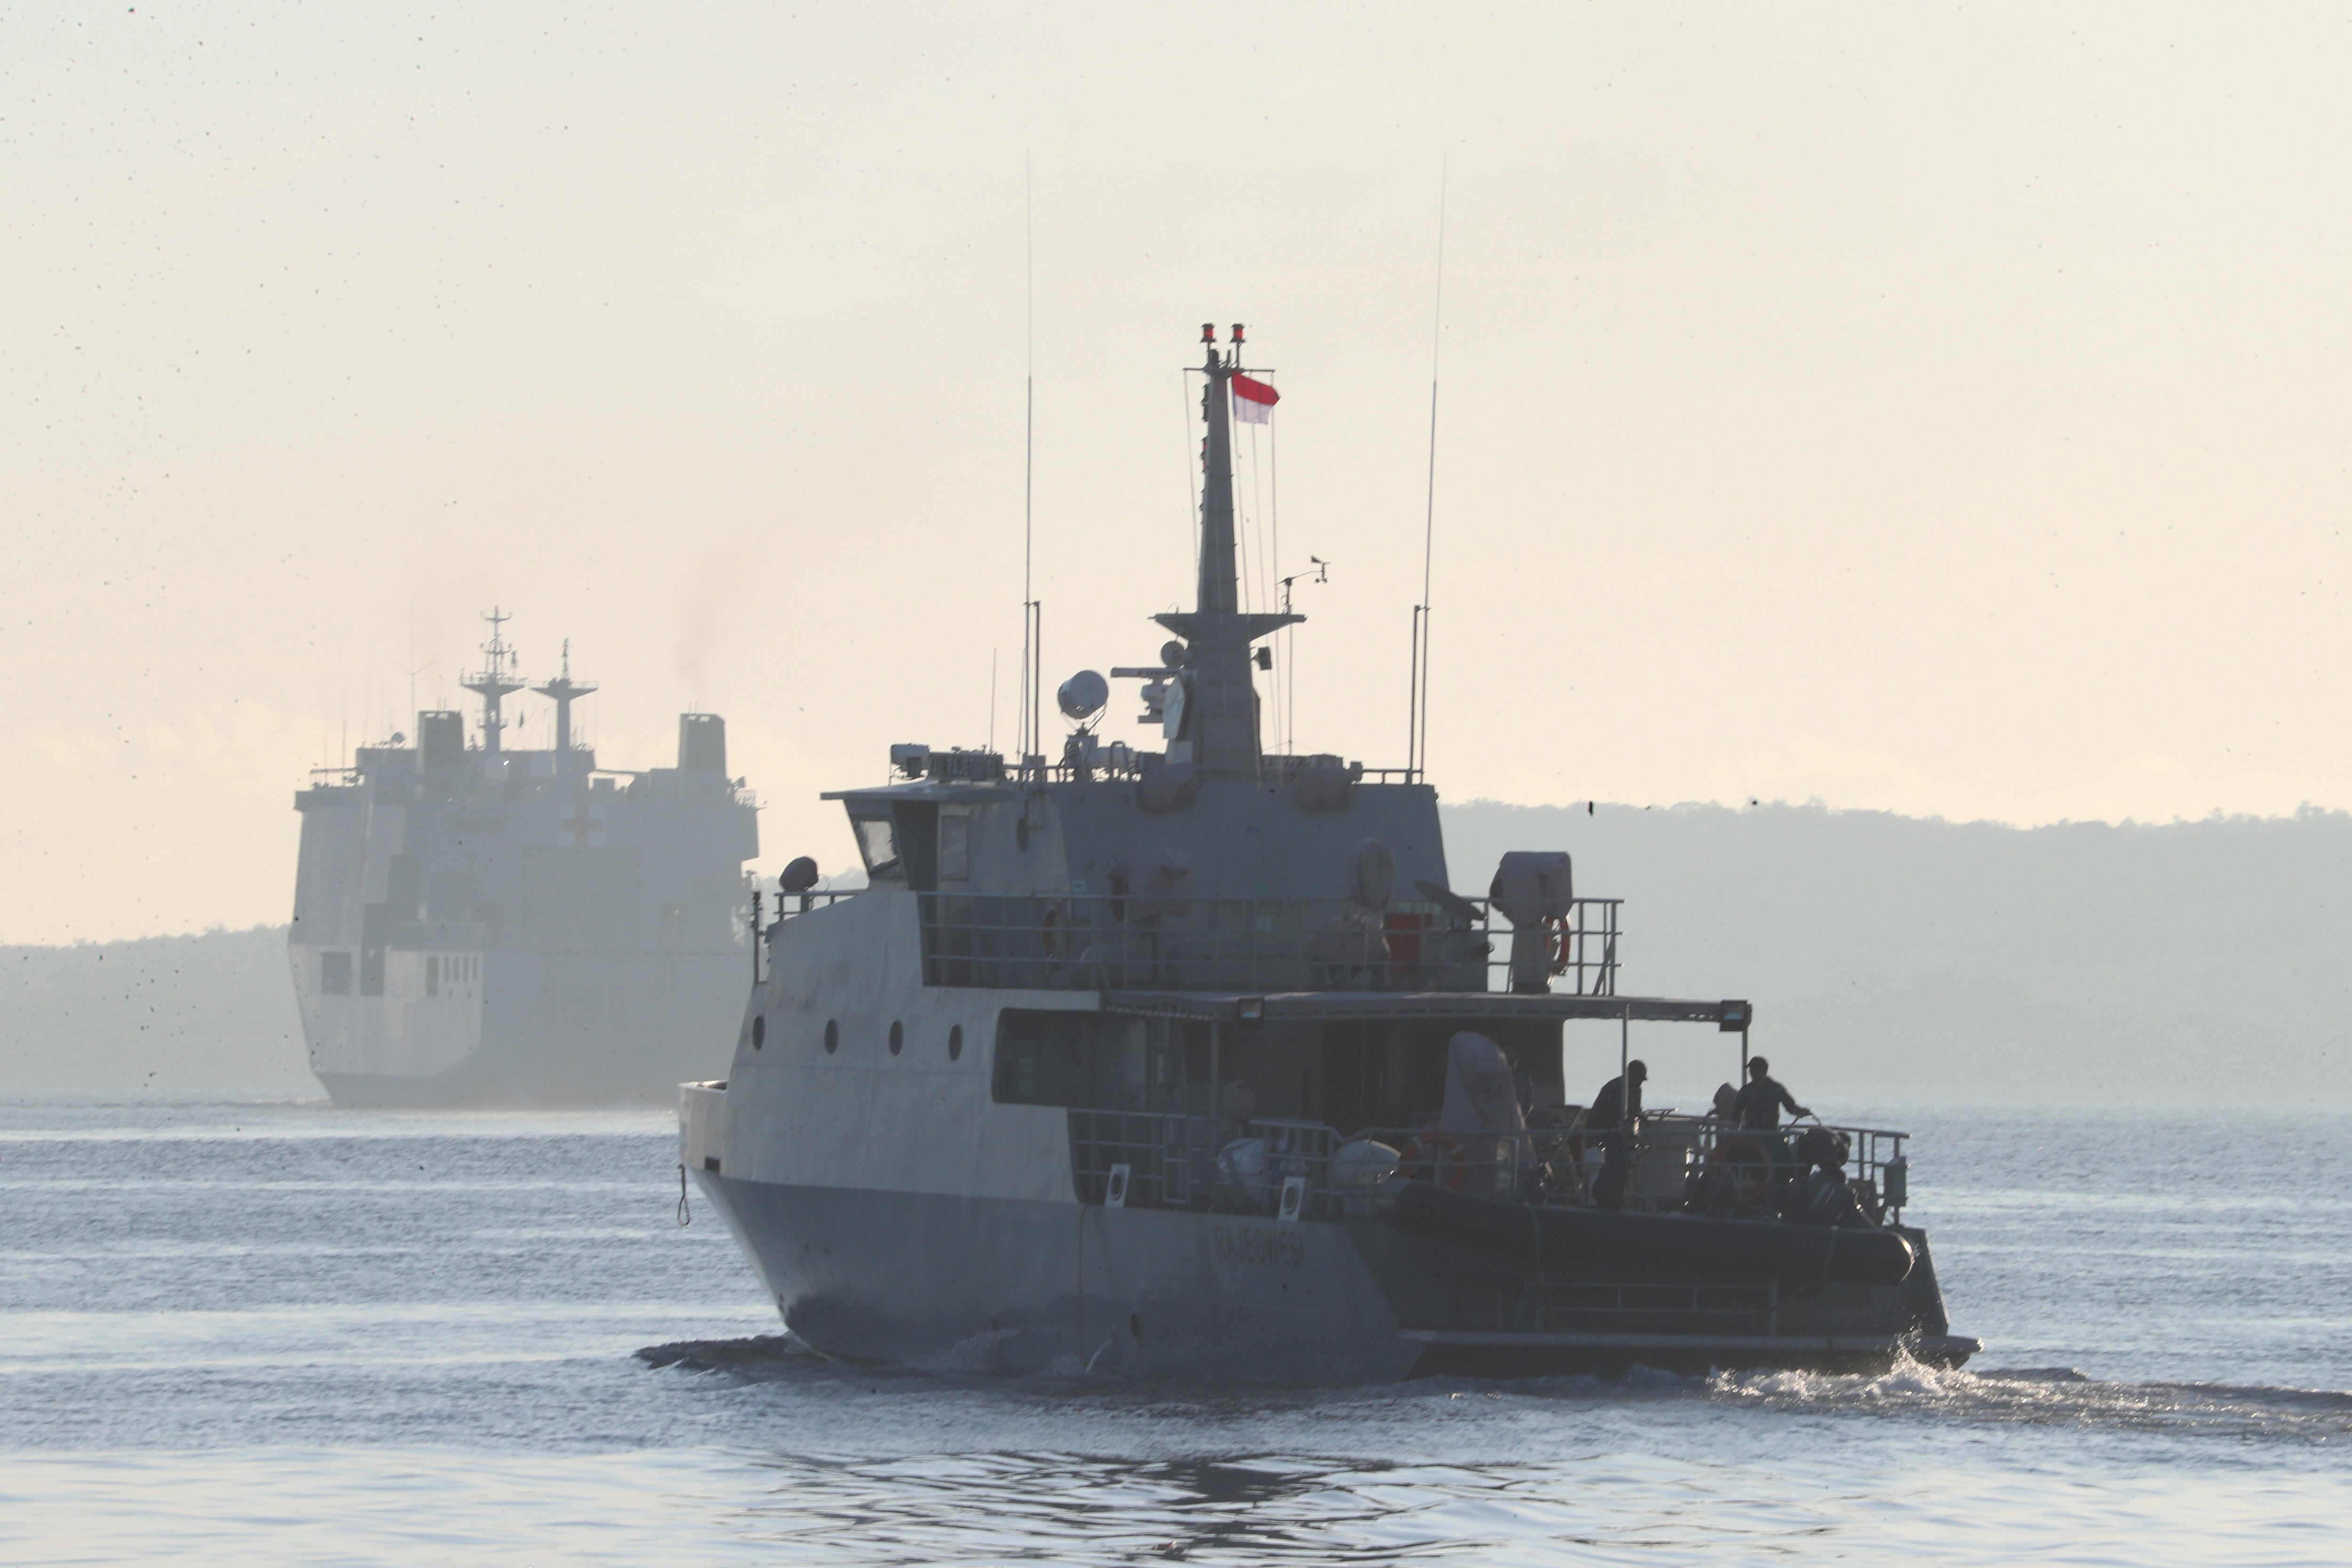 An Indonesian navy patrol ship sails to join the search for submarine KRI Nanggala that went missing while participating in a training exercise